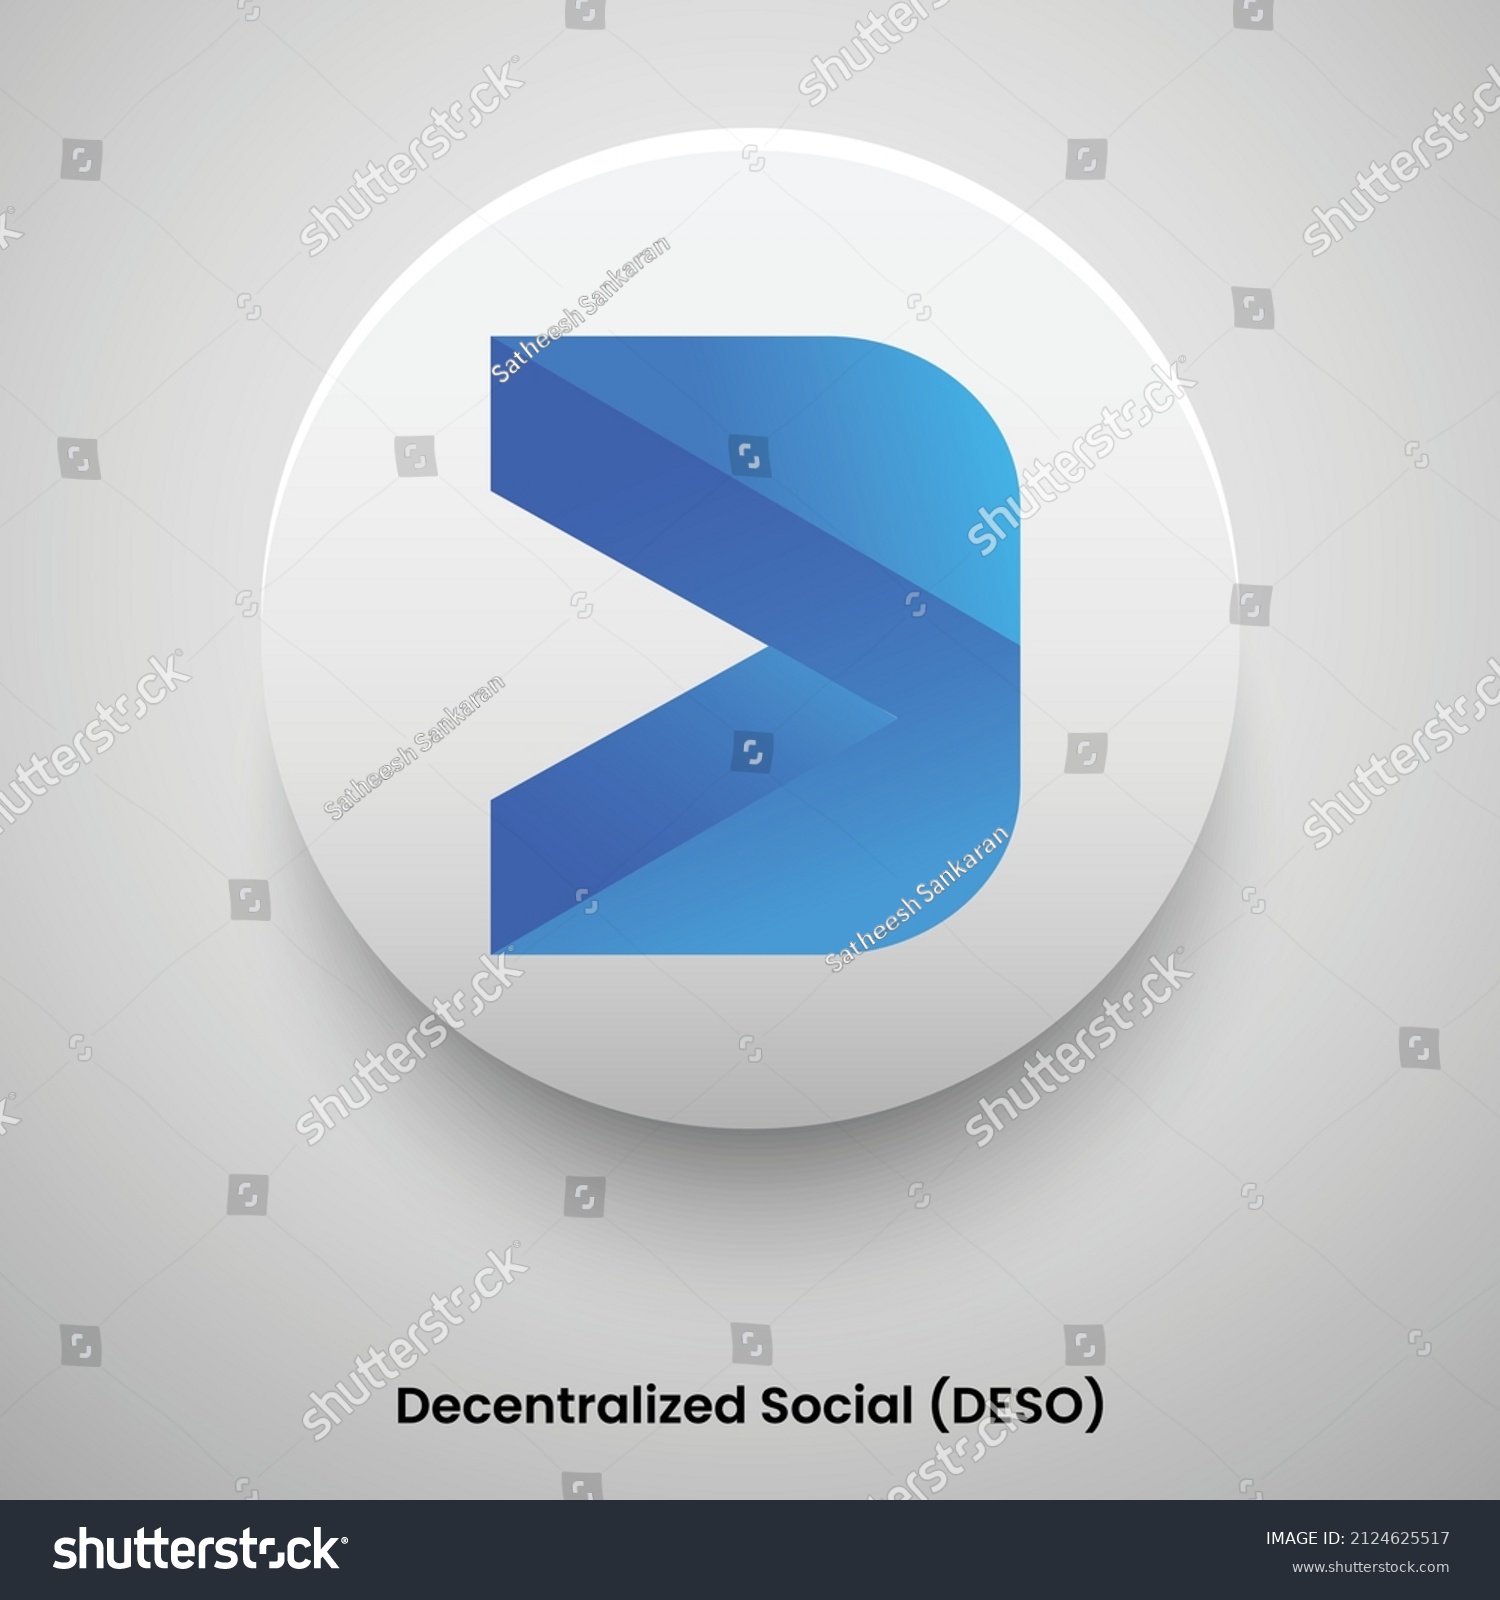 SVG of Decentralized Social  (DESO) cryptocurrency logo symbol vector illustration template Can be used in Banners, posters, icons, stickers, badges, labels and print designs. svg